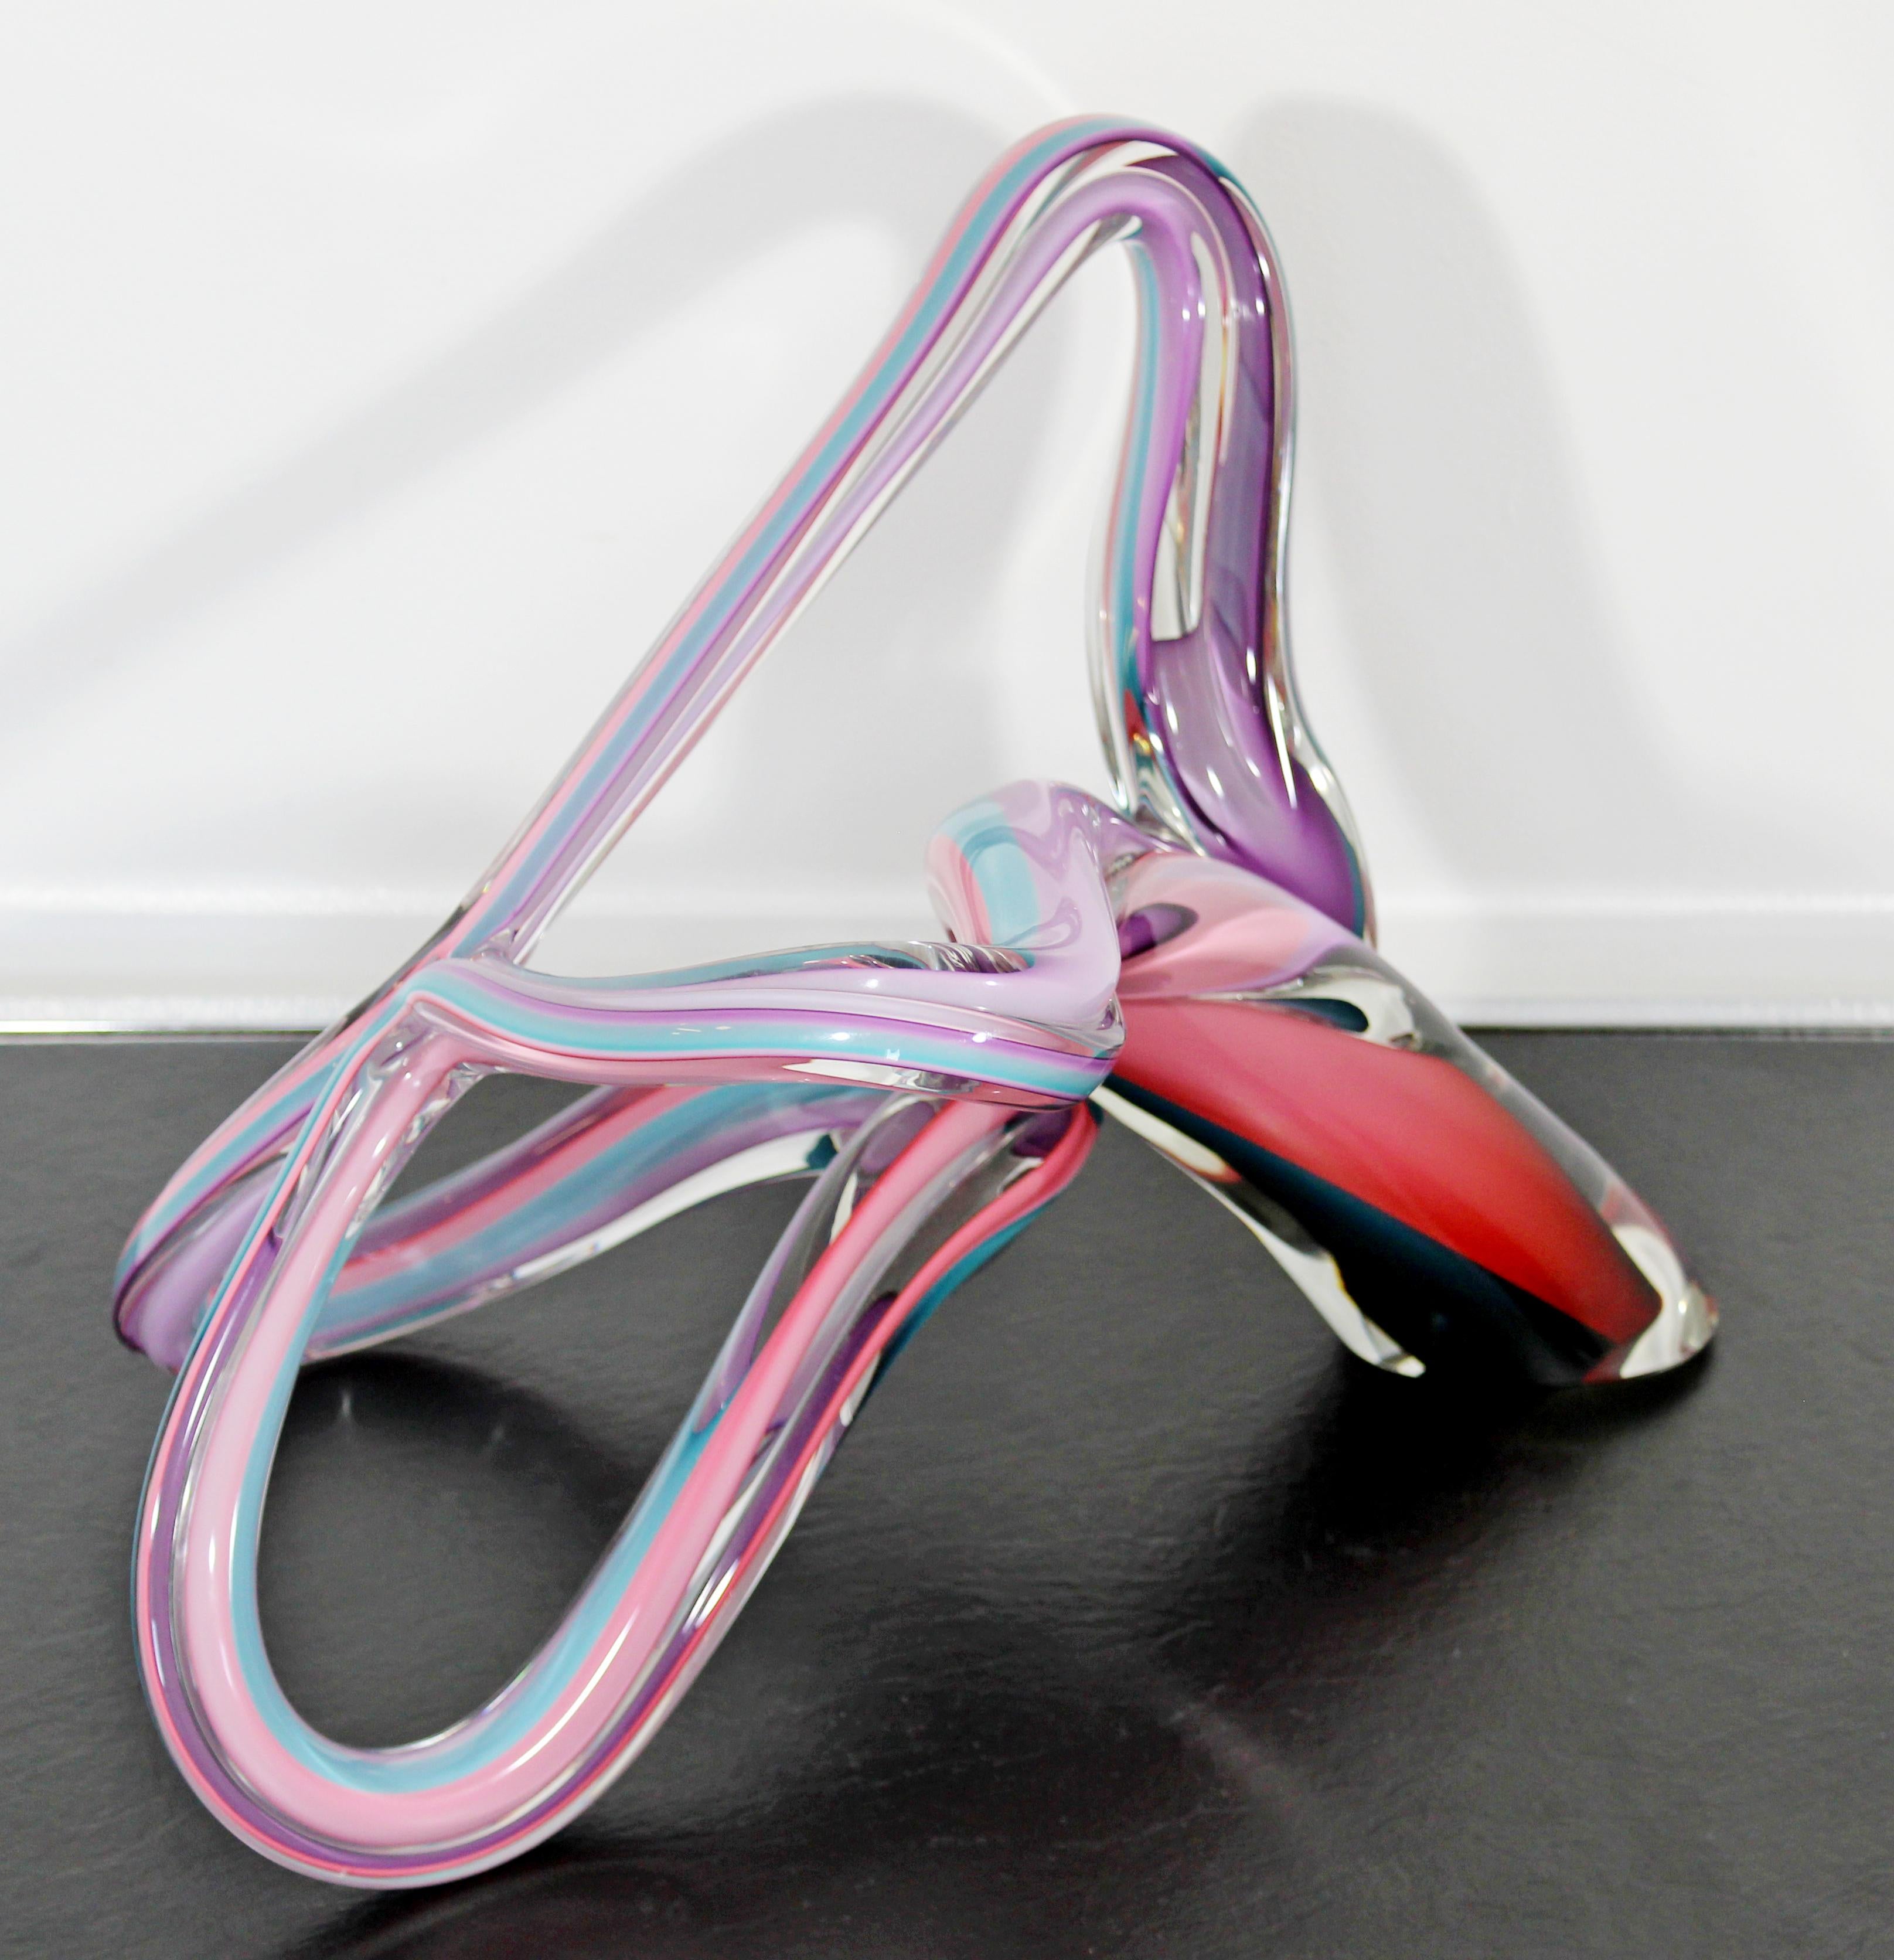 American Contemporary Modern Barry Entner Signed Studio Glass Abstract Sculpture, 1990s